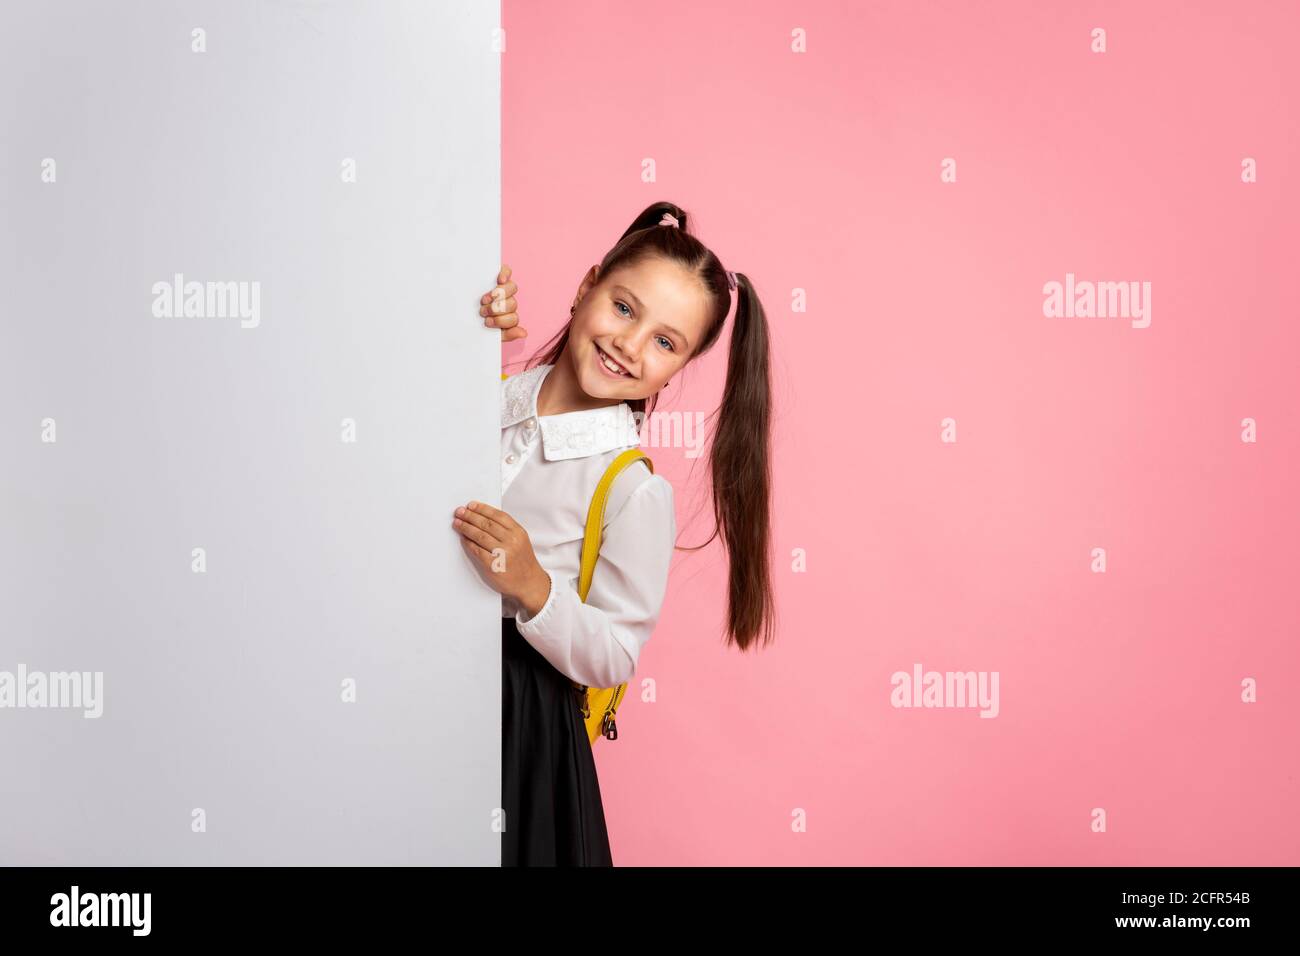 Ready for lesson. Cheerful schoolgirl in uniform peeps out from with white billboard Stock Photo